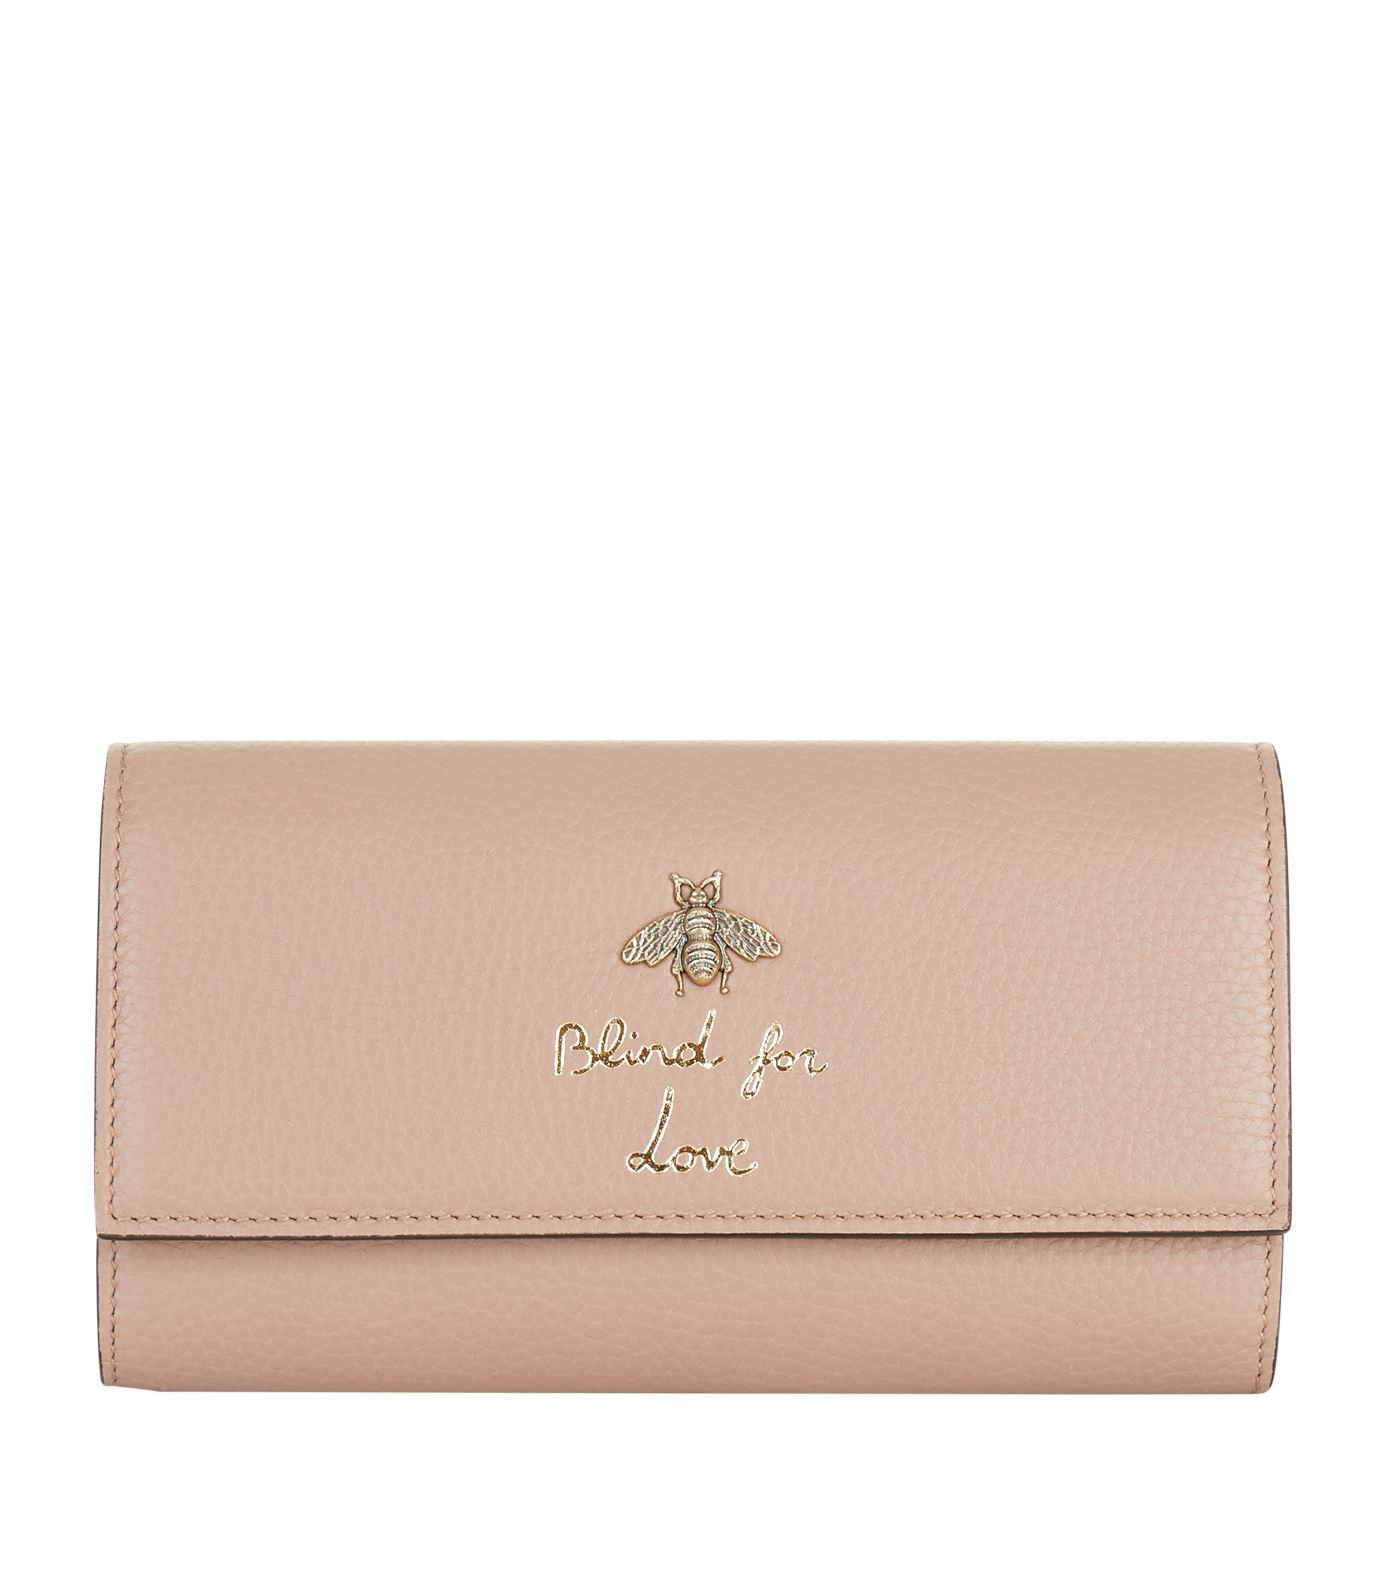 Gucci Blind For Love Bee Wallet in White | Lyst